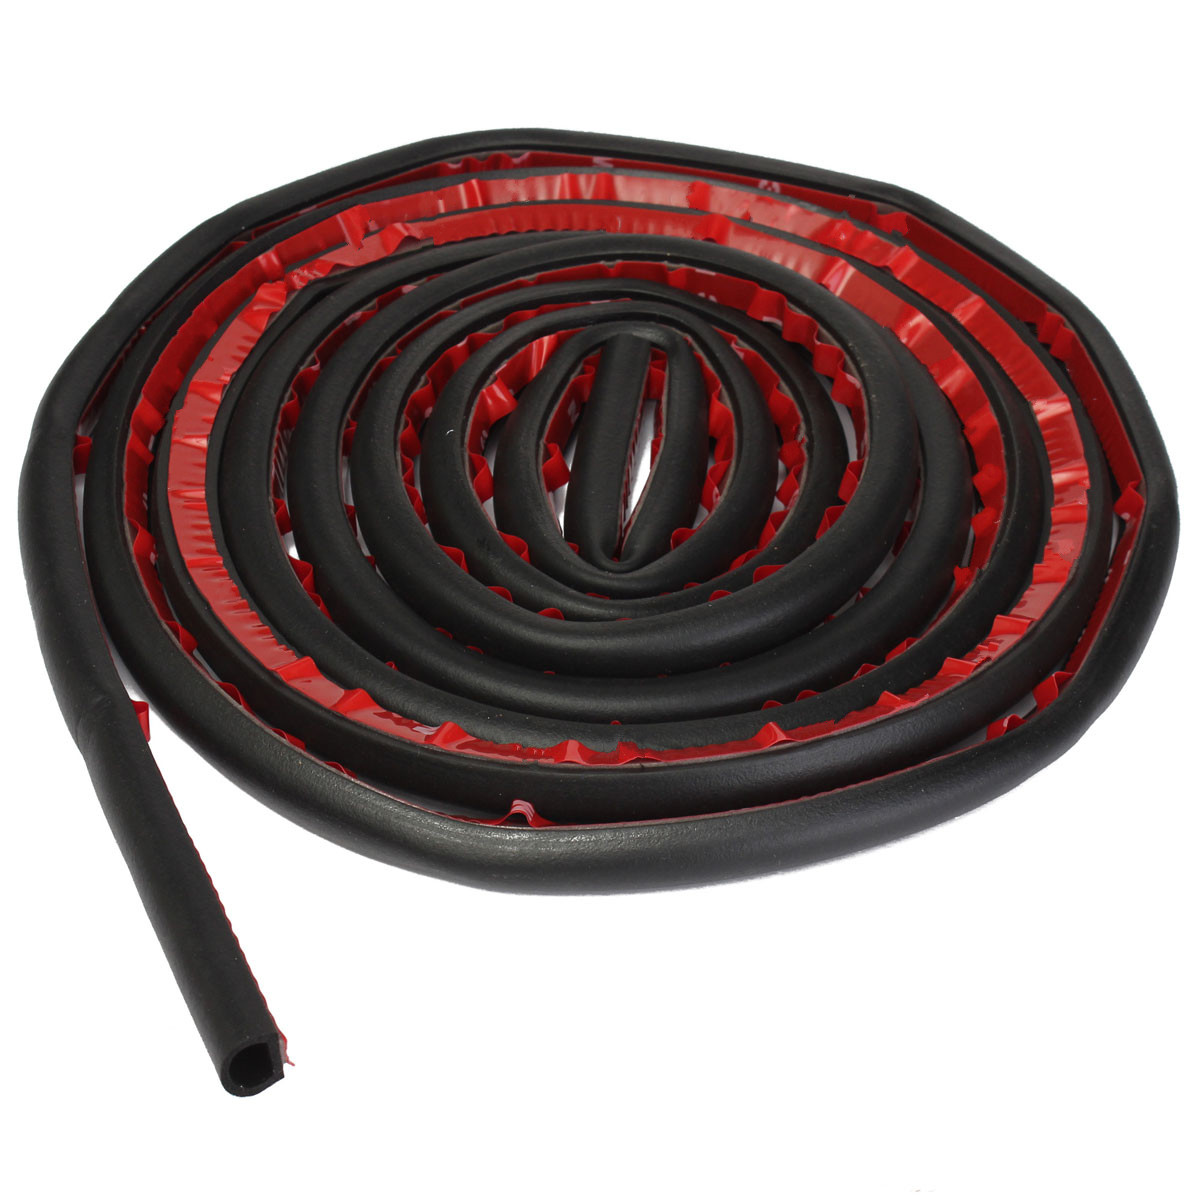 4M Large/Small D-shape Car Rubber Seal Sound Insulation Car Door Sealing Strip Weather Strip For Engine Hood Car Boot